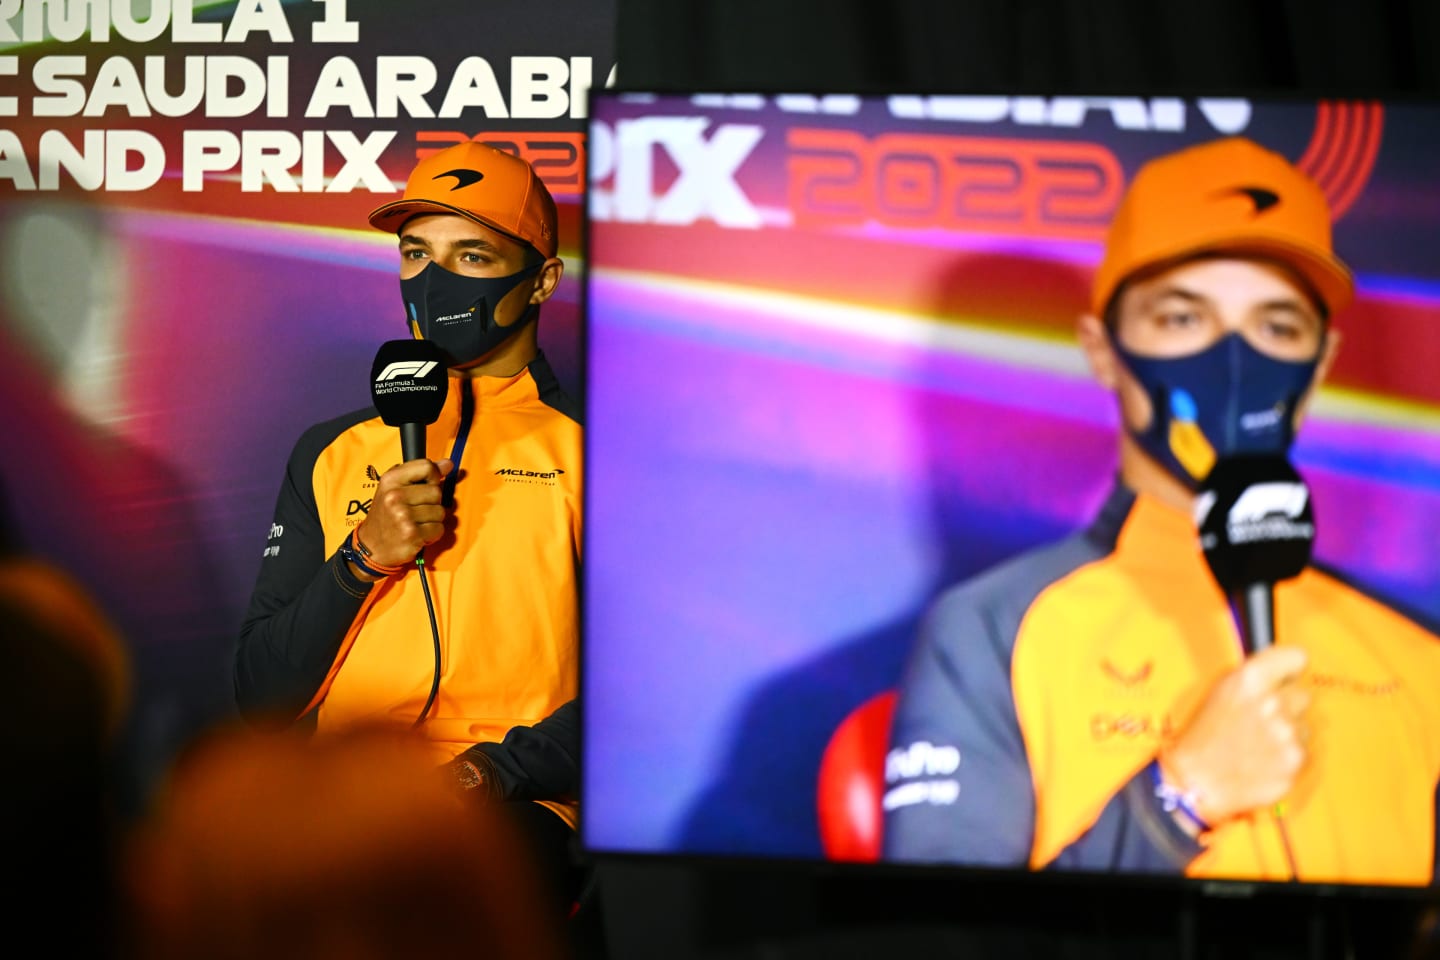 JEDDAH, SAUDI ARABIA - MARCH 25: Lando Norris of Great Britain and McLaren talks in the Drivers Press Conference before practice ahead of the F1 Grand Prix of Saudi Arabia at the Jeddah Corniche Circuit on March 25, 2022 in Jeddah, Saudi Arabia. (Photo by Clive Mason/Getty Images)